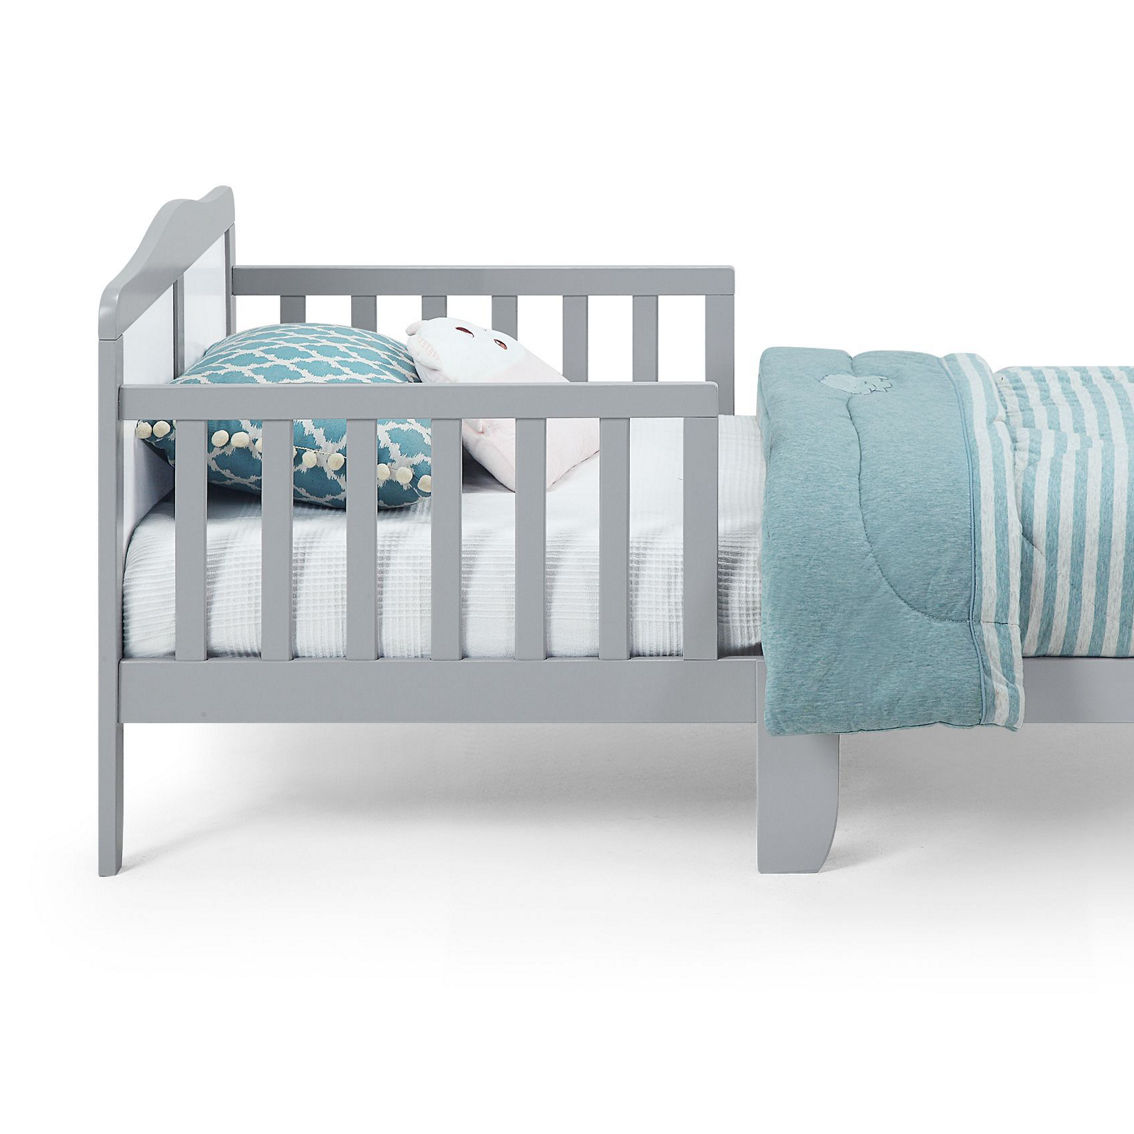 Olive & Opie Birdie Toddler Bed Light Gray/White - Image 3 of 5